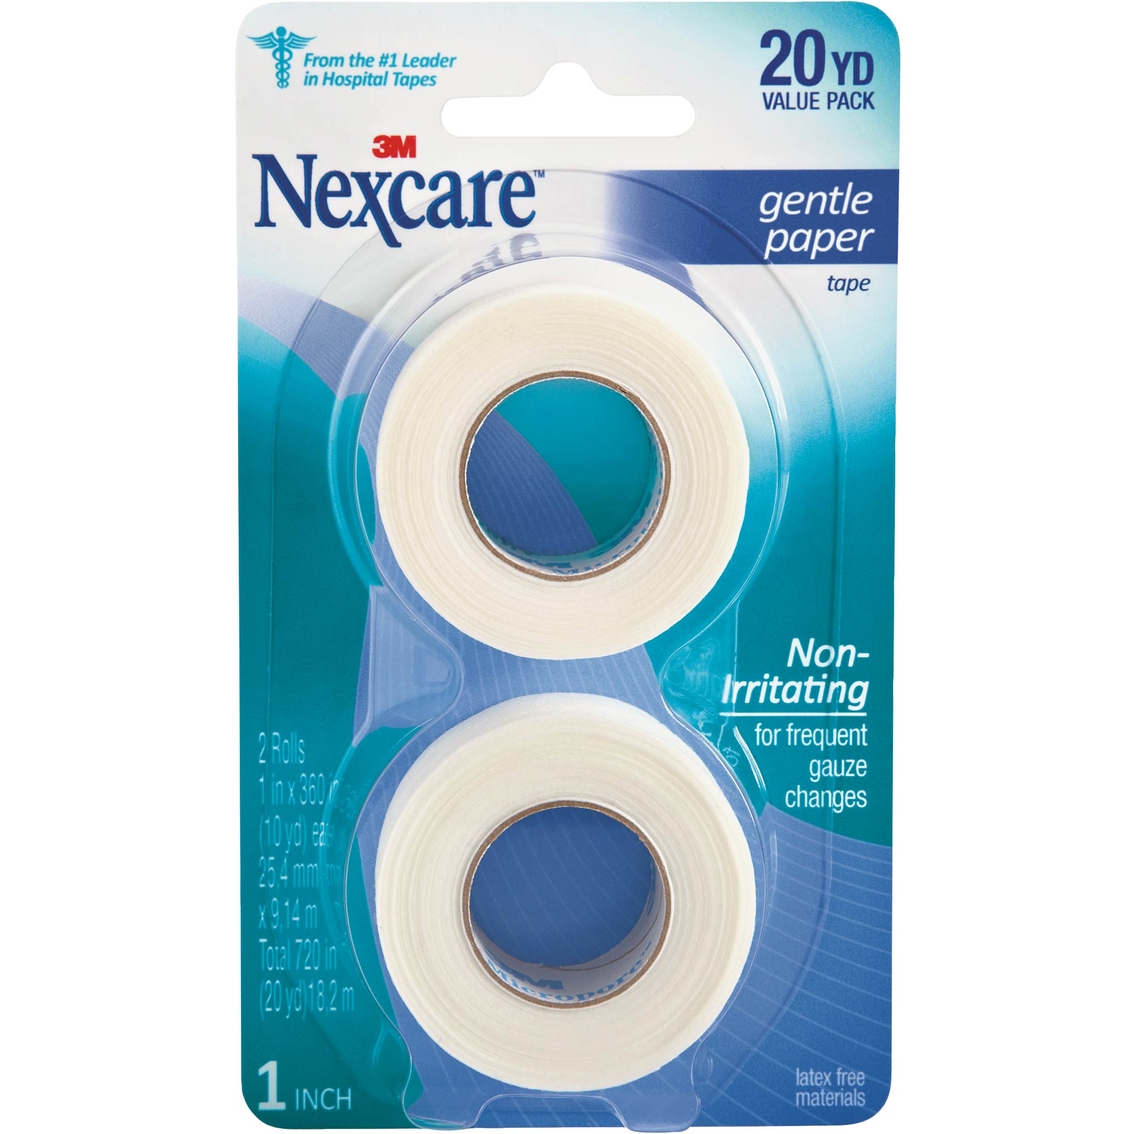 Nexcare Gentle Paper Tape 2 Pk., First Aid, Beauty & Health